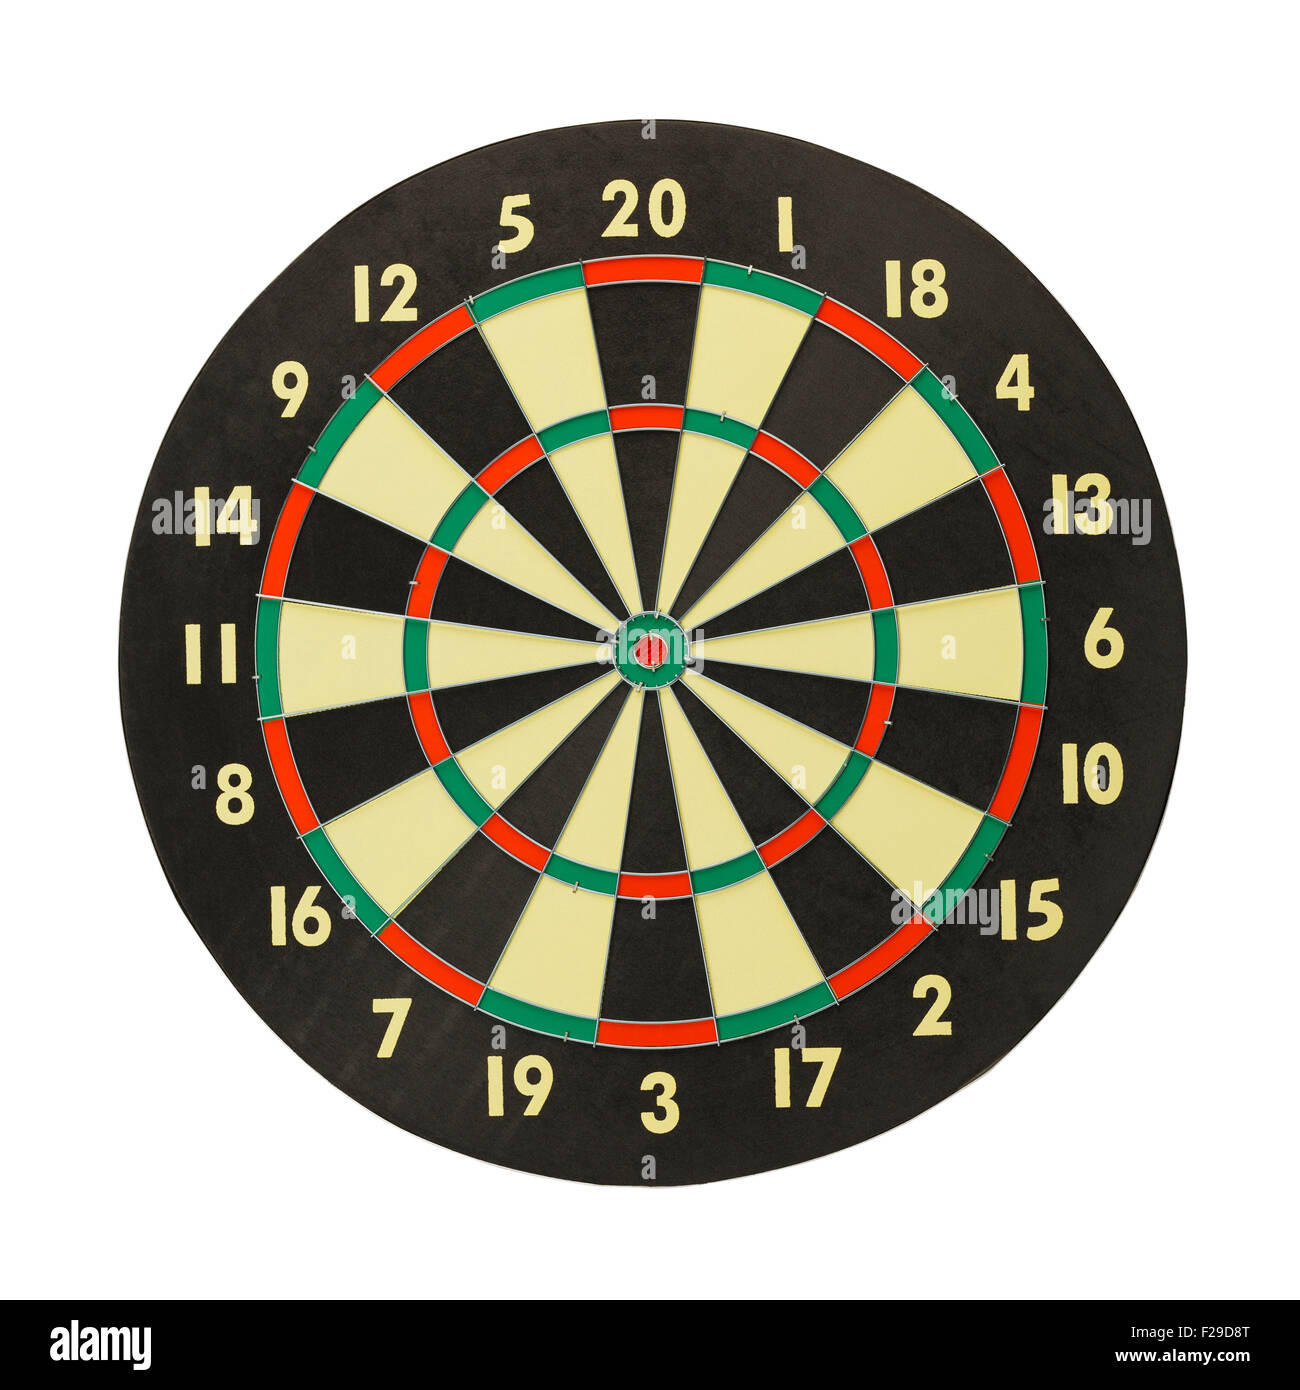 Front View of Dartboard Isolated on White Background. Stock Photo